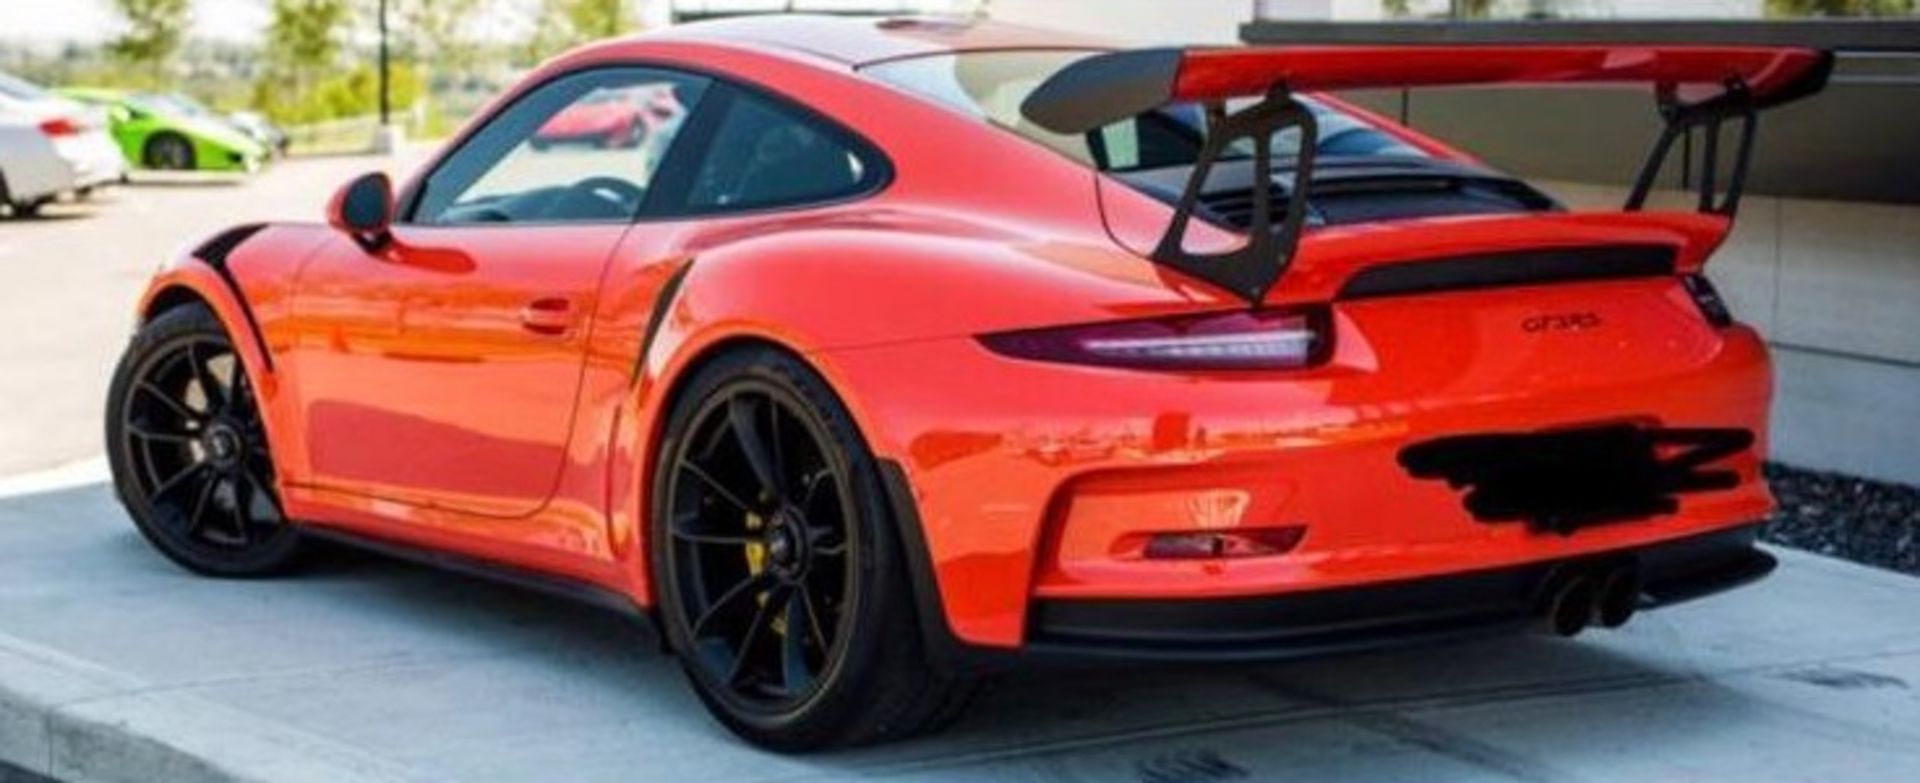 2016 Porsche Gt3rs full carbon spec 8k miles full service histroy 1 owner will be in uk mid january - Image 2 of 7